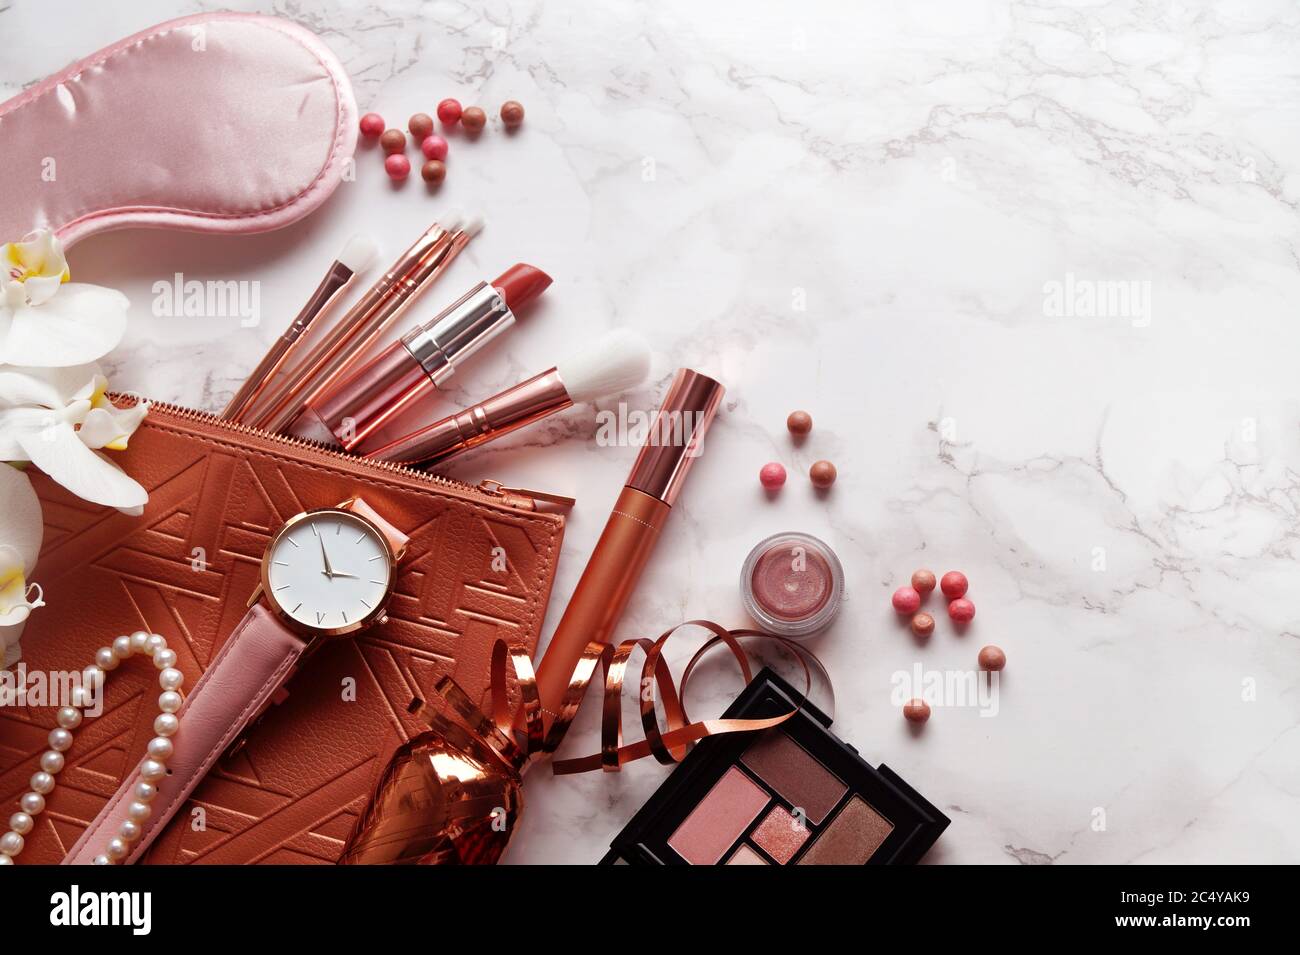 Makeup table, luxury makeup and jewelry Stock Photo